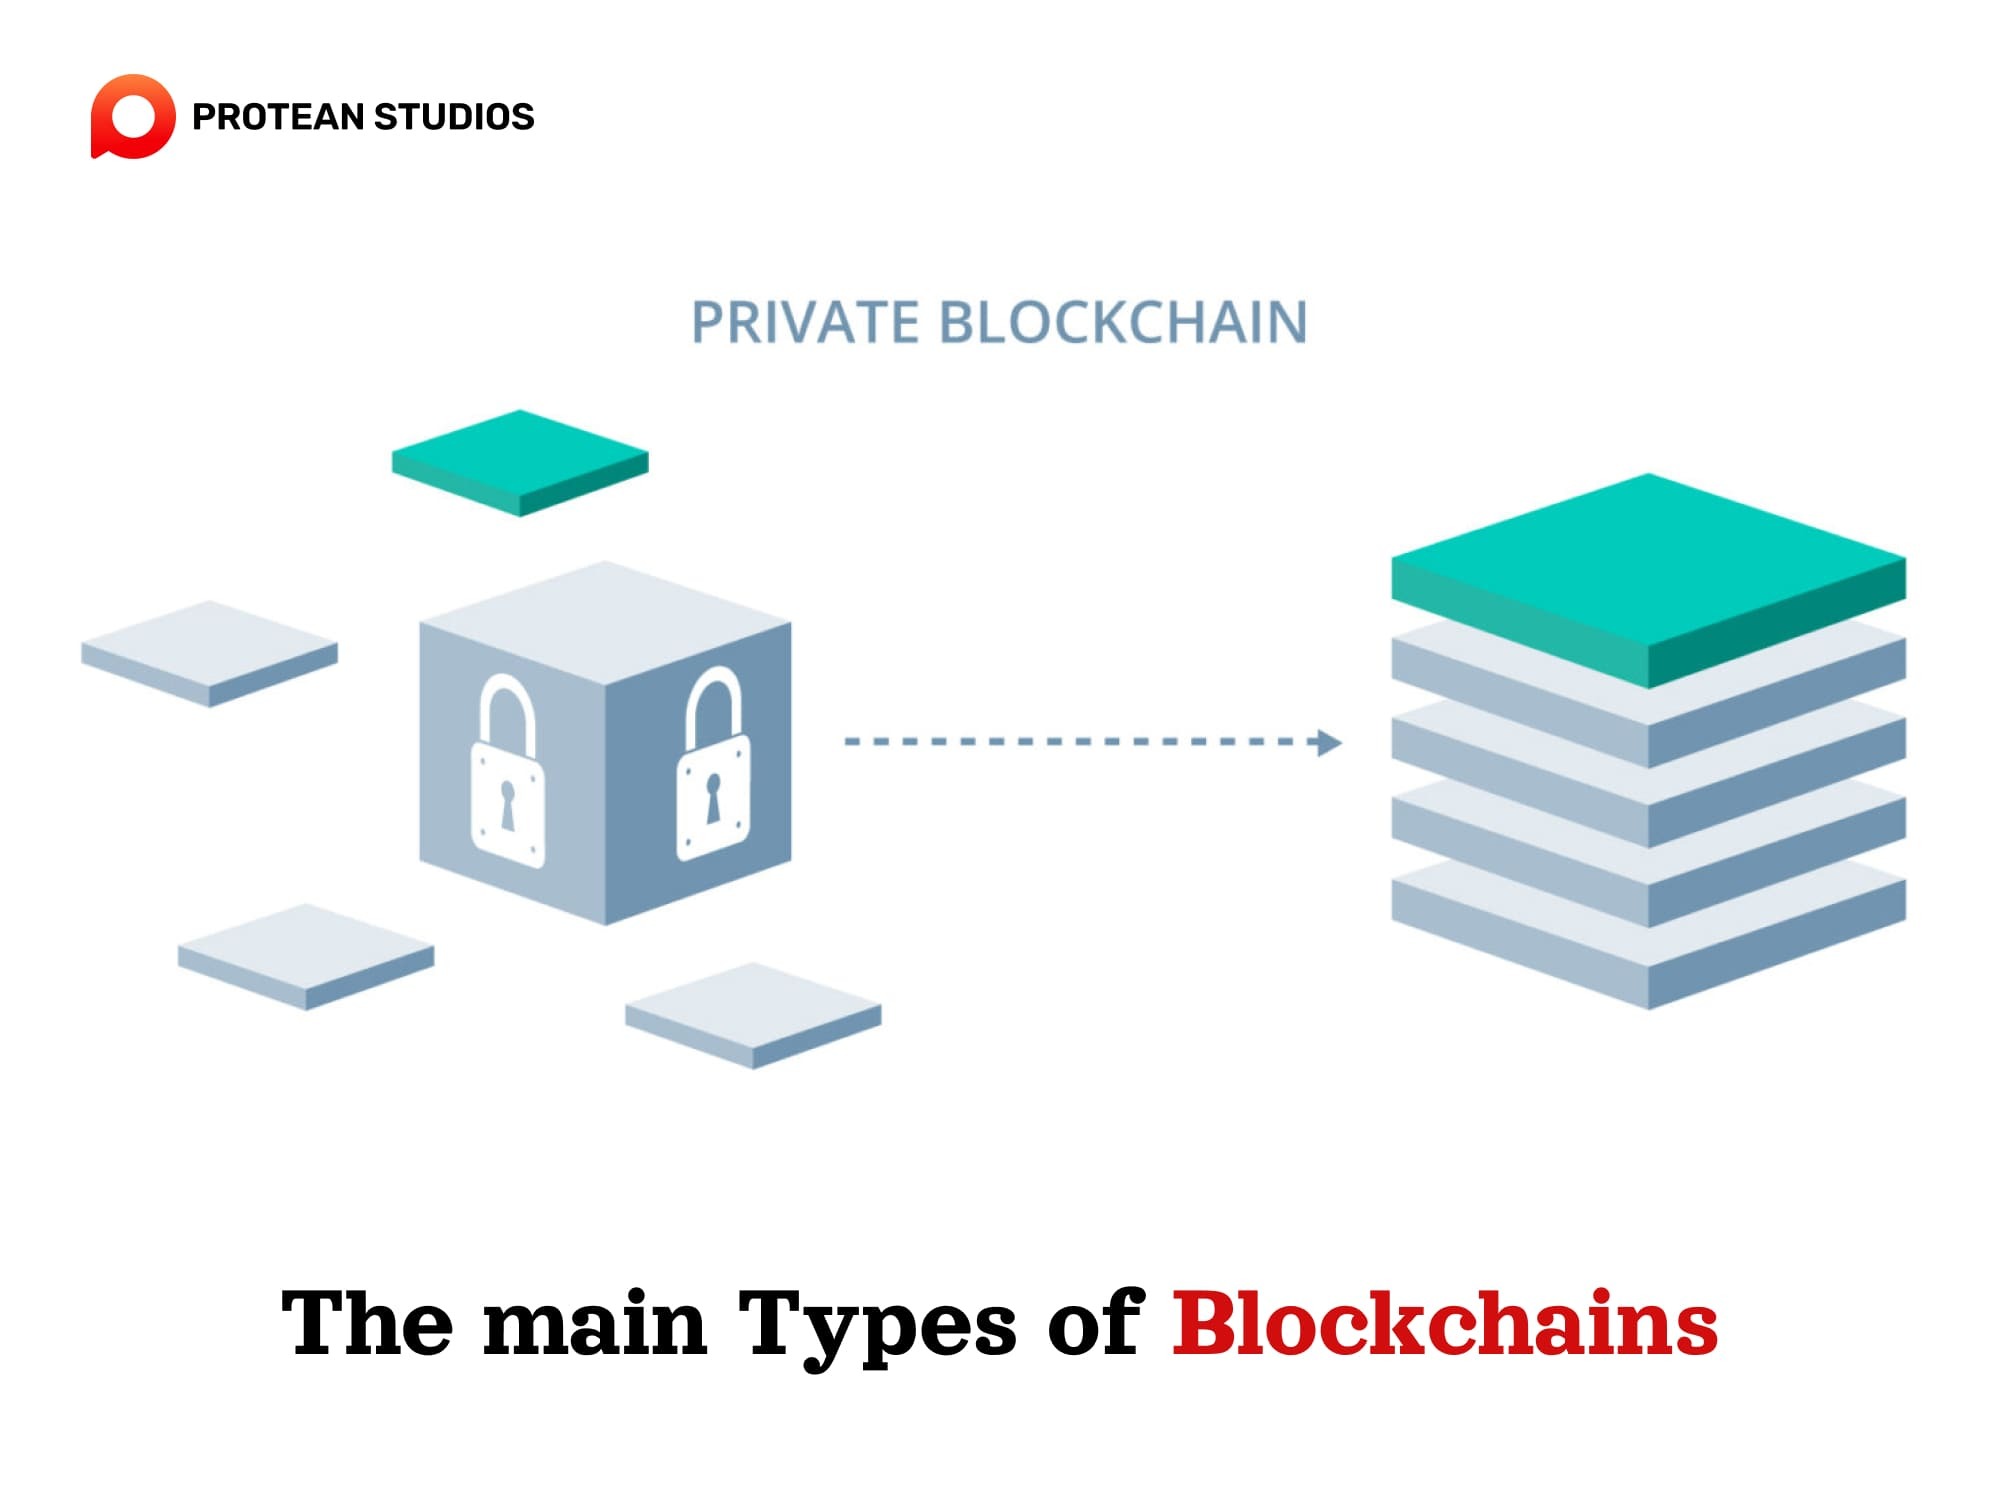 Restricted user access on private blockchains